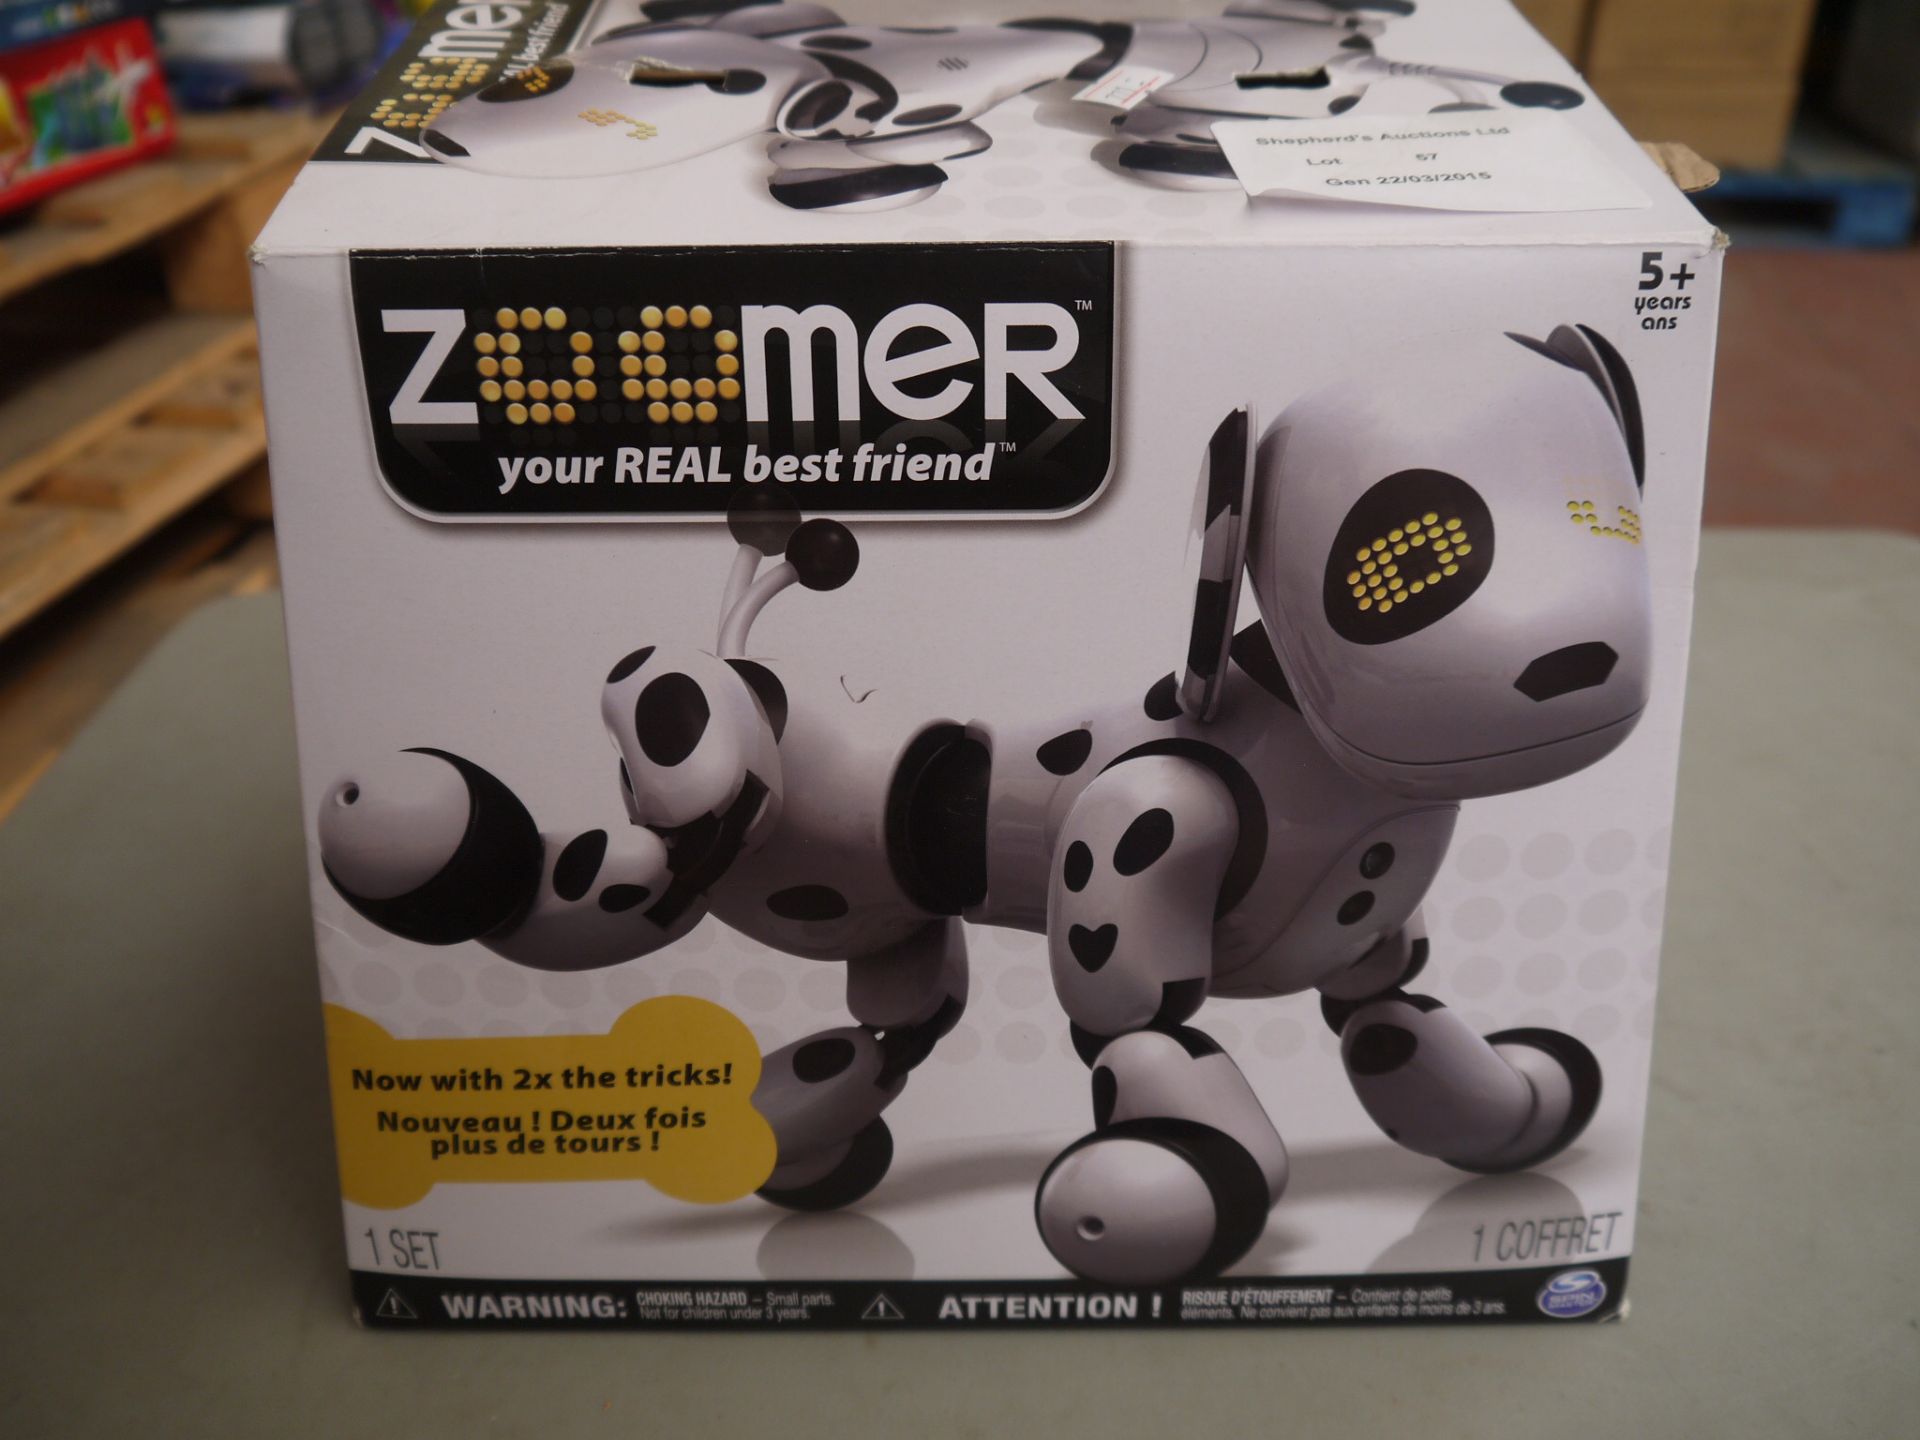 Zoomer Dalmation, the cute, interactive robotic Dalmatian pup that has lots of cool tricks and moves